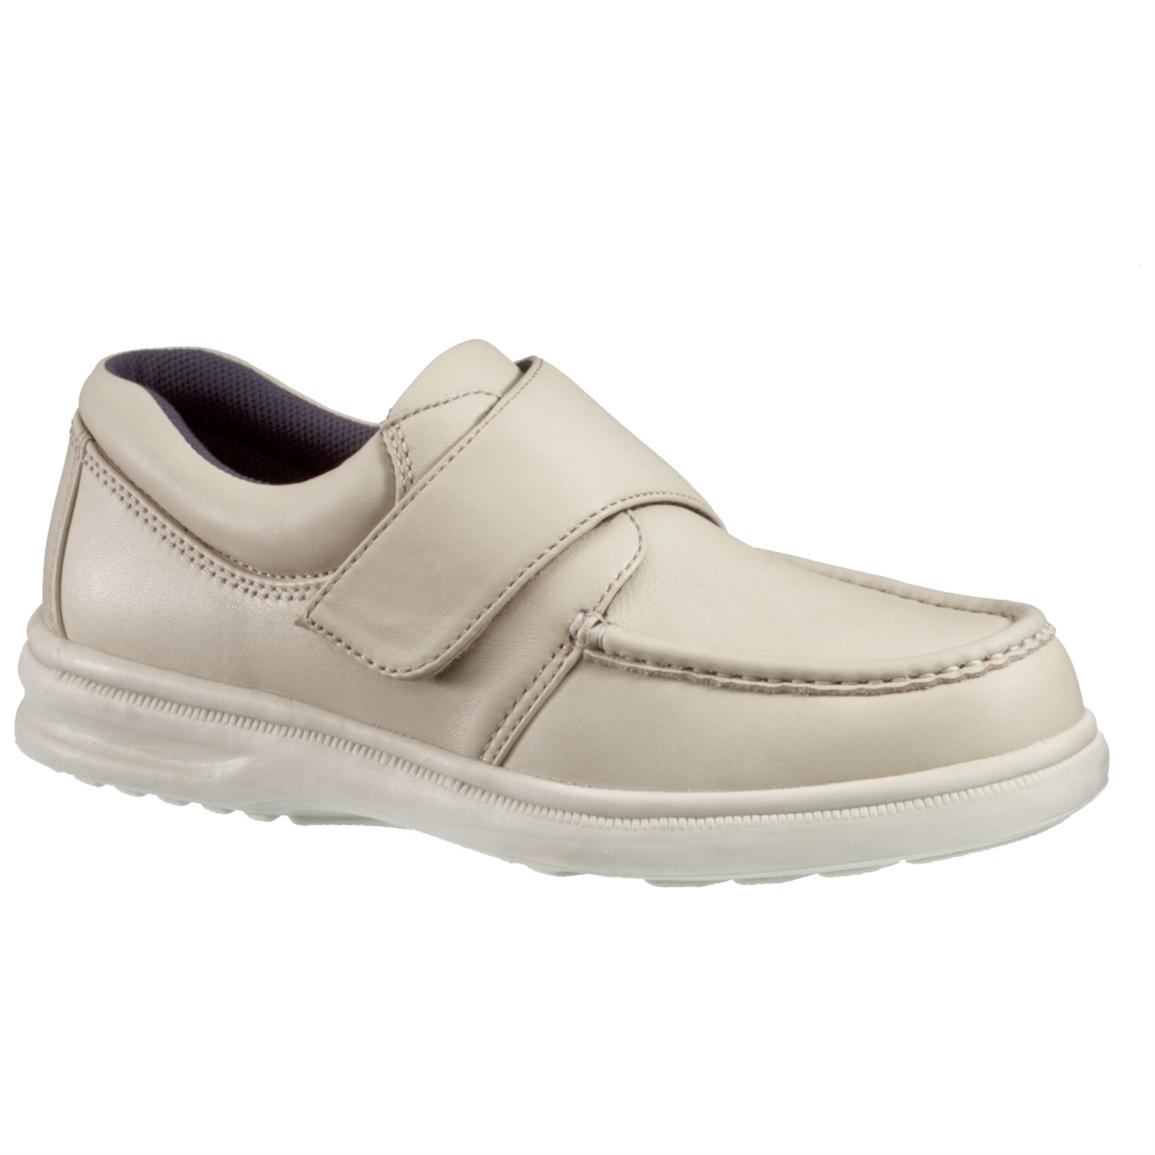 Men's Hush PuppiesÂ® Gil Shoes - 153129, Casual Shoes at Sportsman's ...